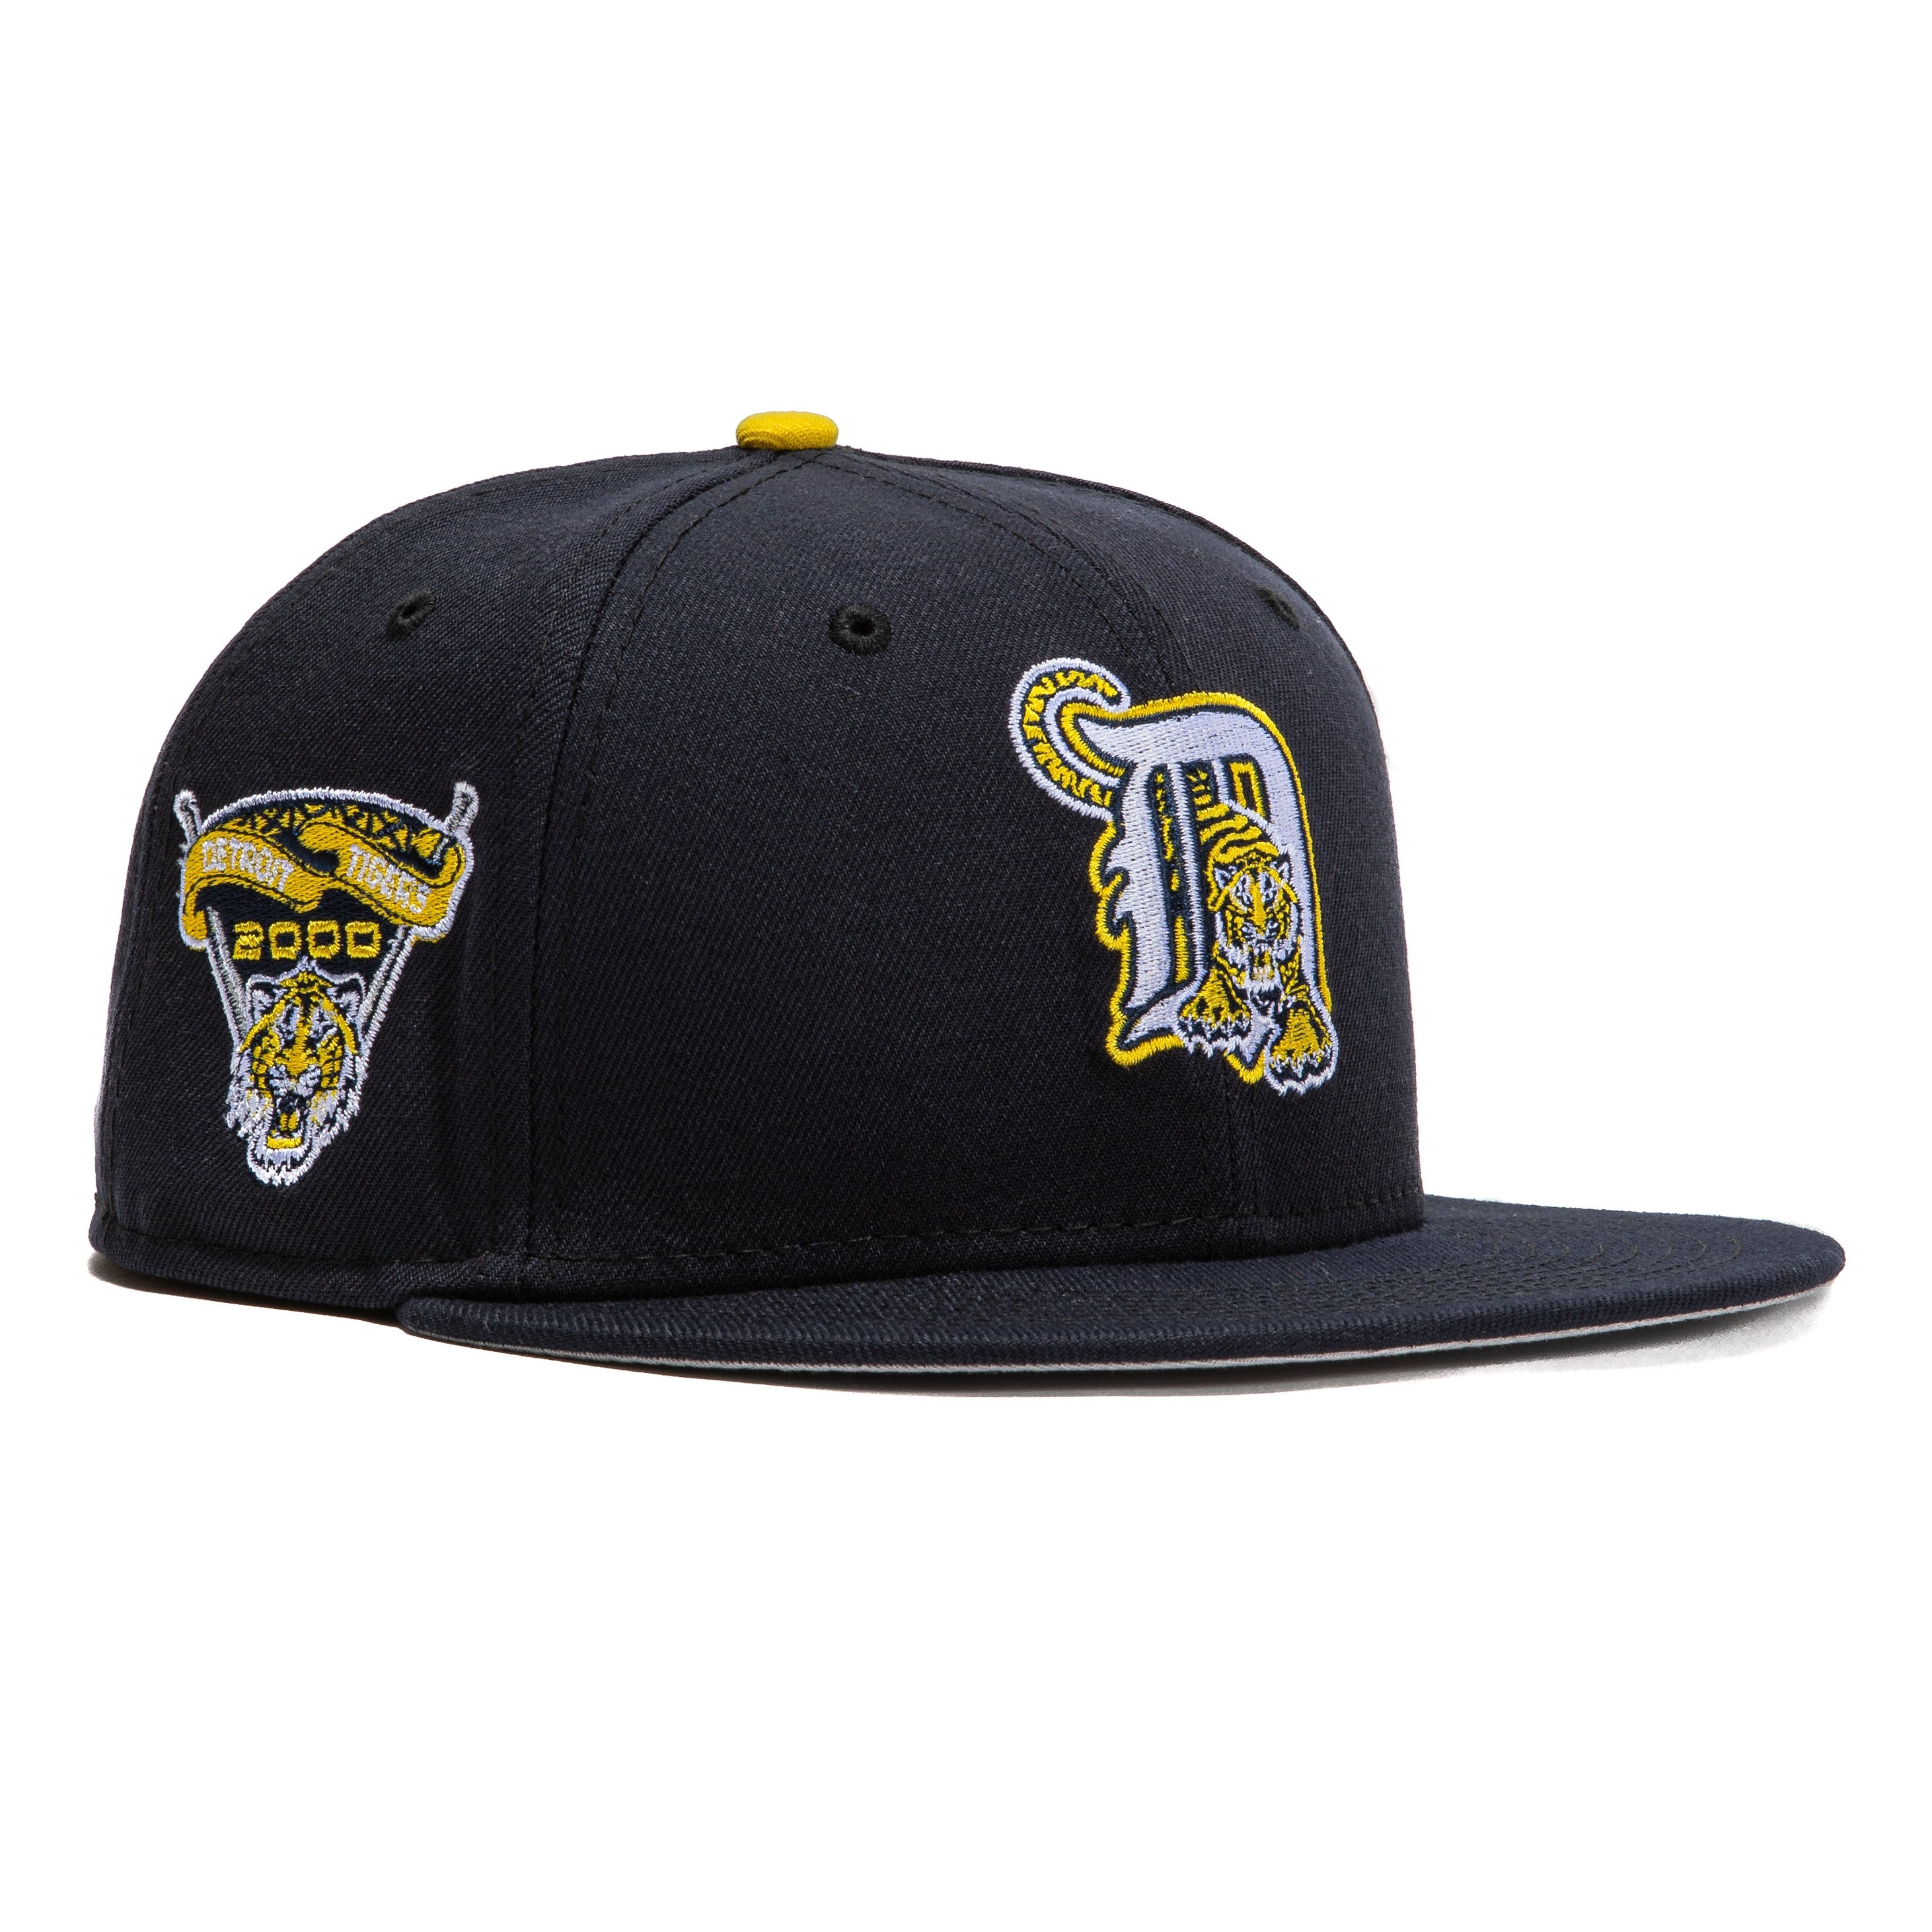 Campus Fashion Fitted Hats